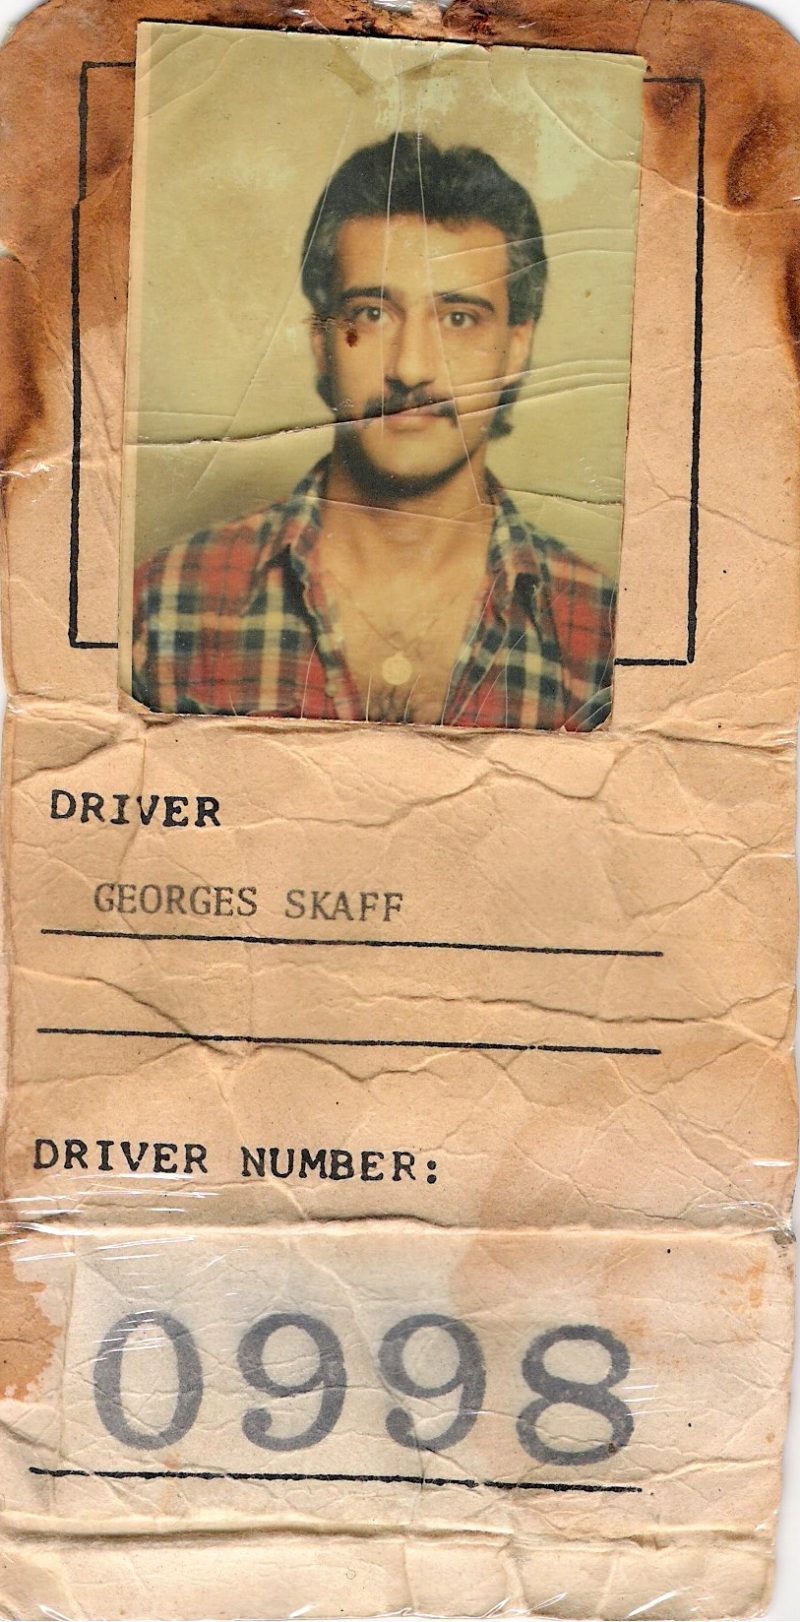 Found Taxi Driver Photo ID & Number, 'George Skaff, #0998', Unknown Origin but found in New York City, Measures 2.75 x 5.5 inches. $45.